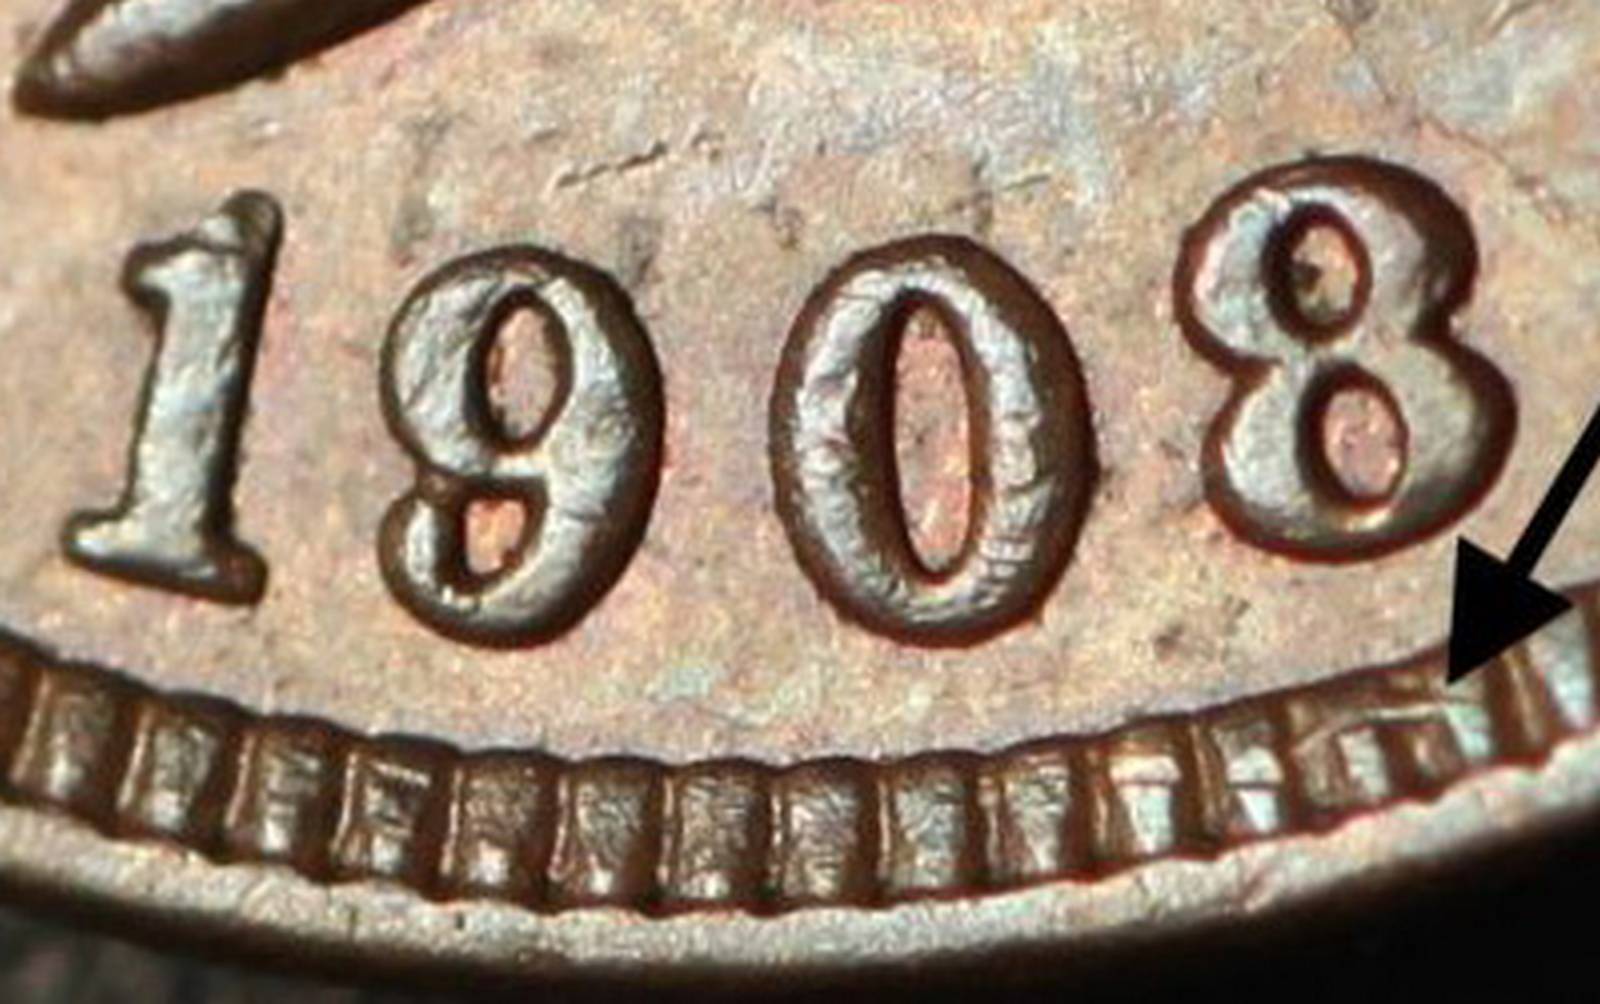 1908 MPD-001 - Indian Head Penny - Photo by Ed Nathanson